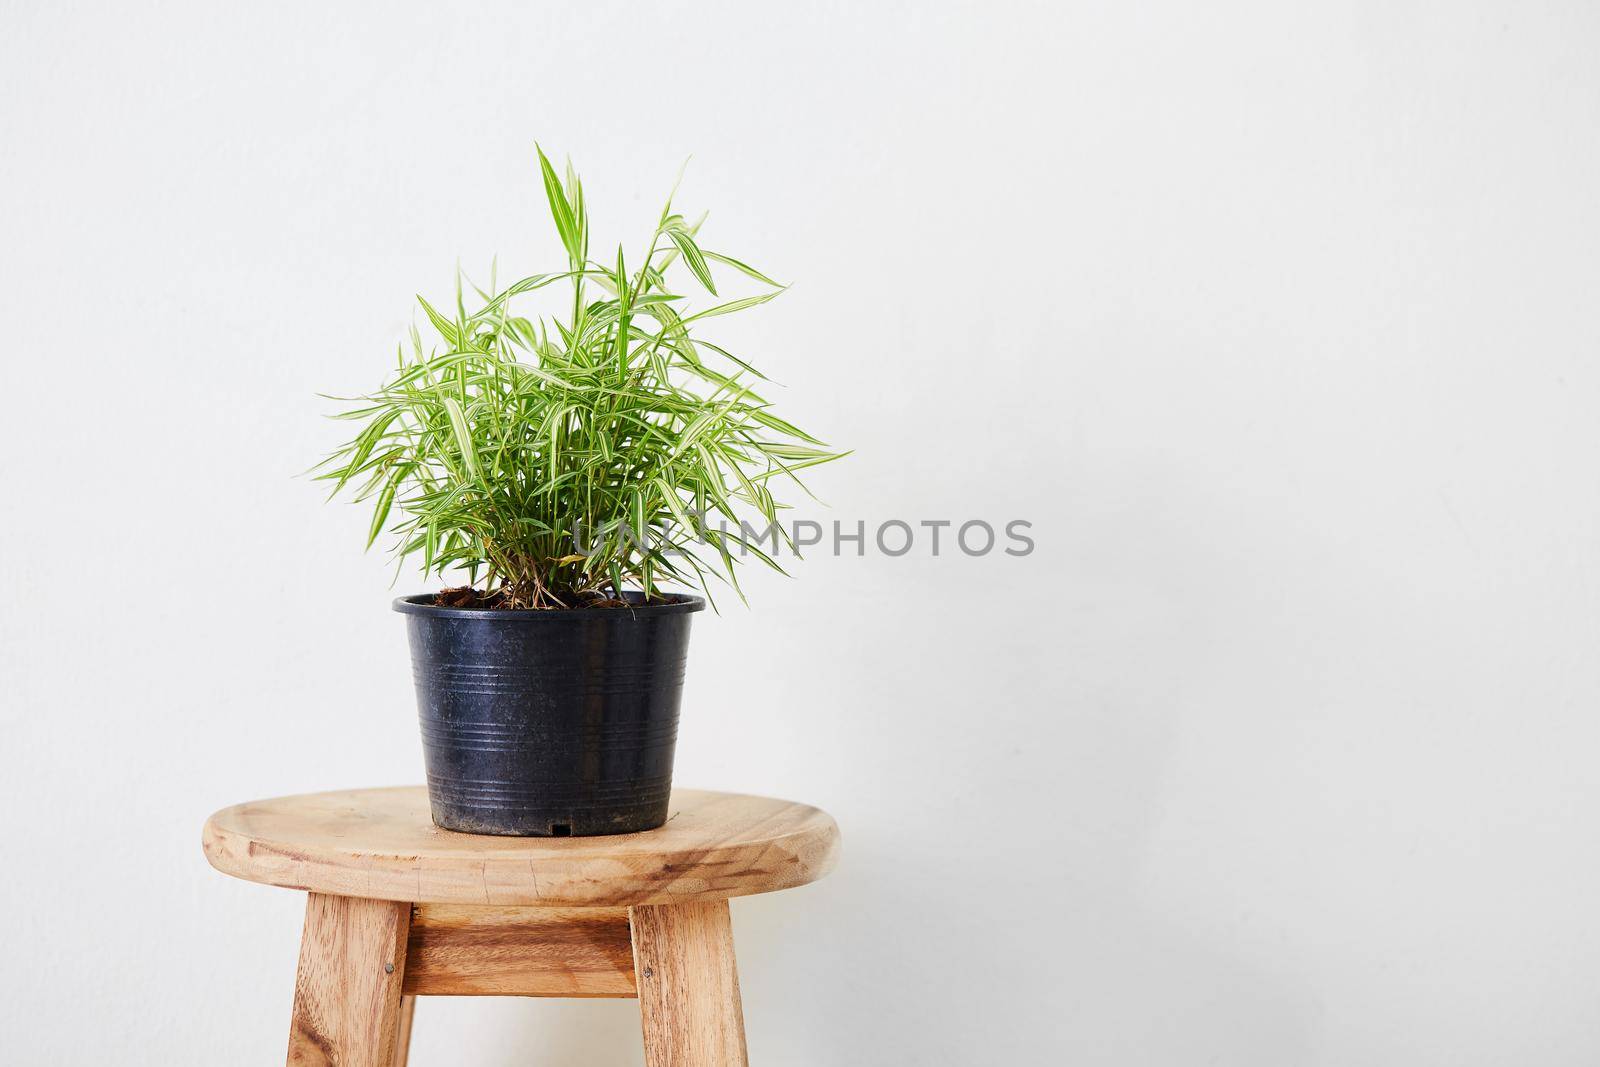 Little grass or bamboo by Wasant